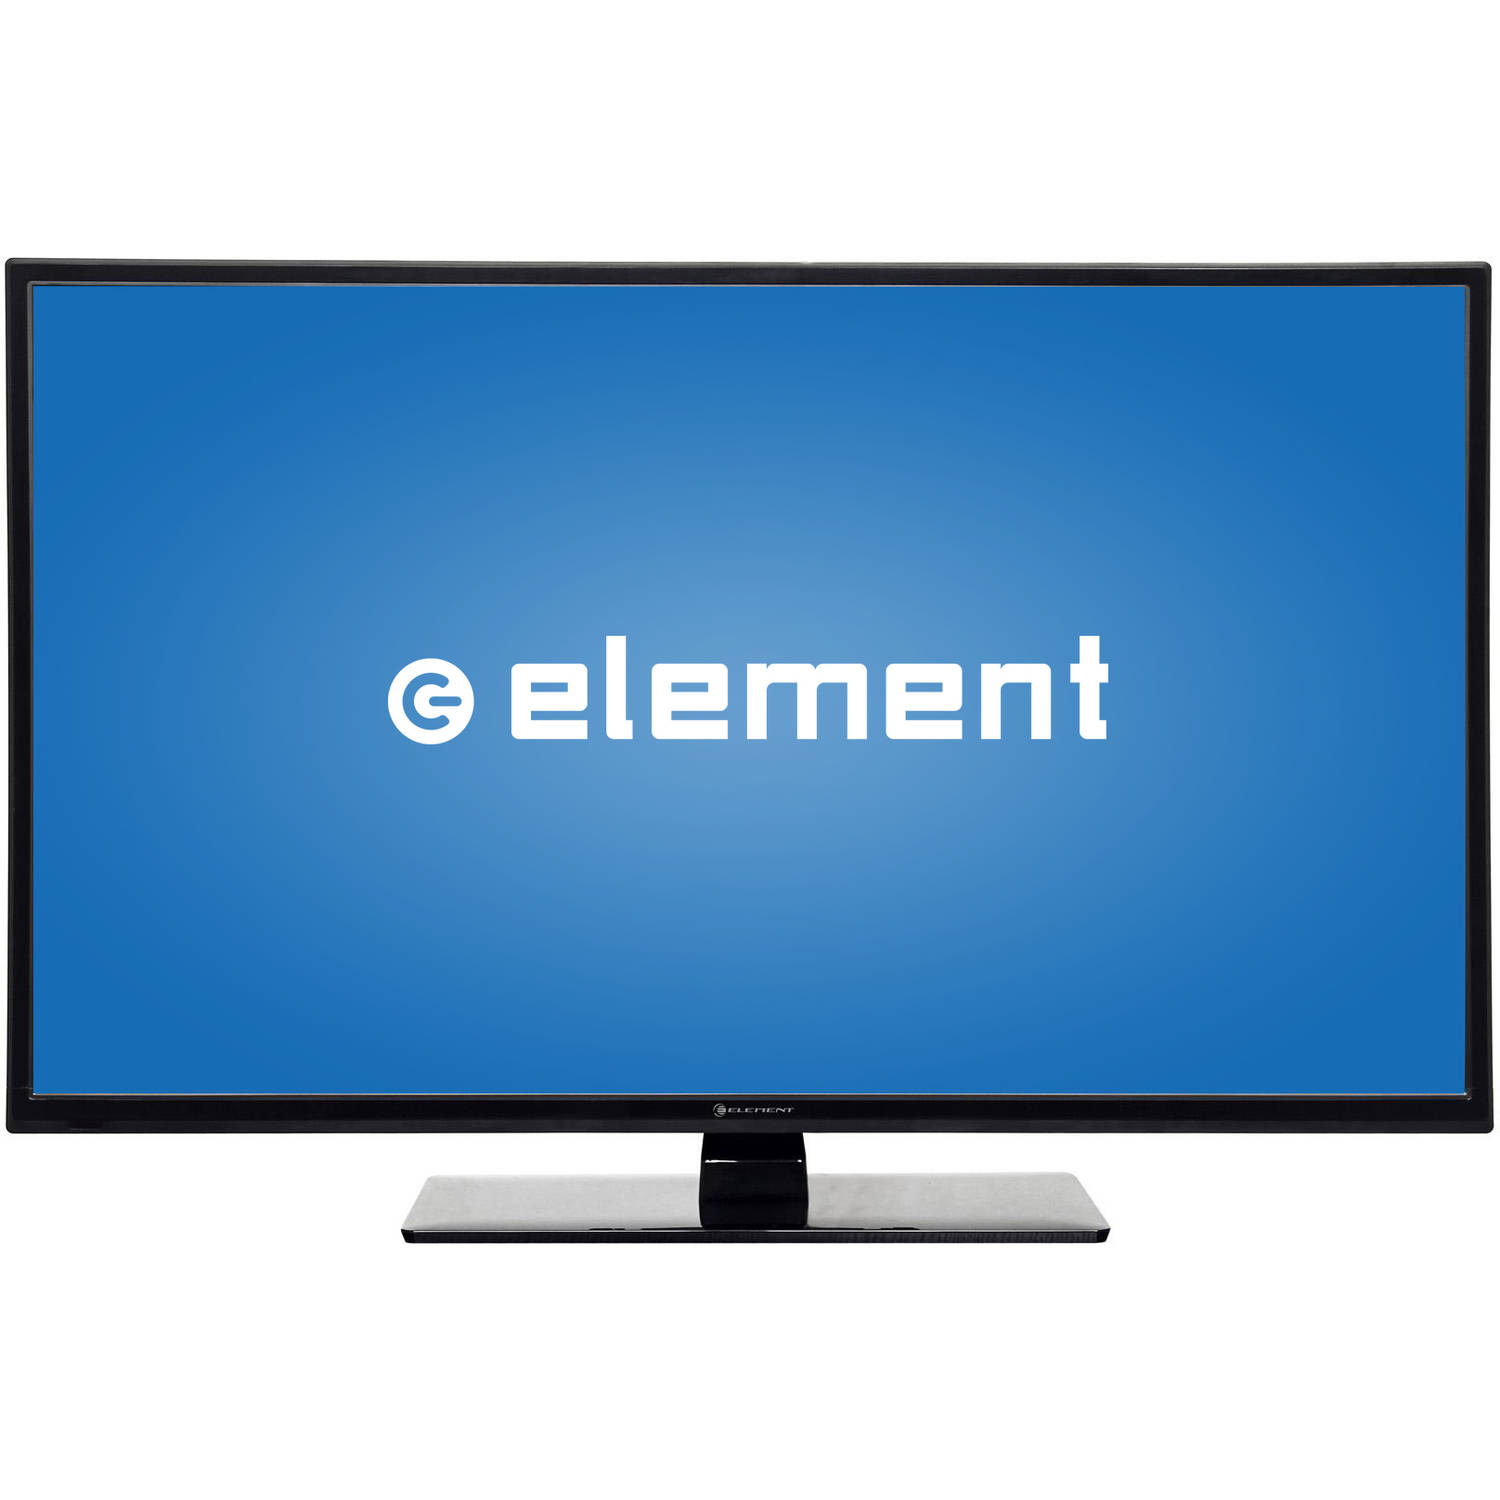 Restored ELEMENT 40" Class FHD (1080P) LED TV (Refurbished) - image 1 of 4